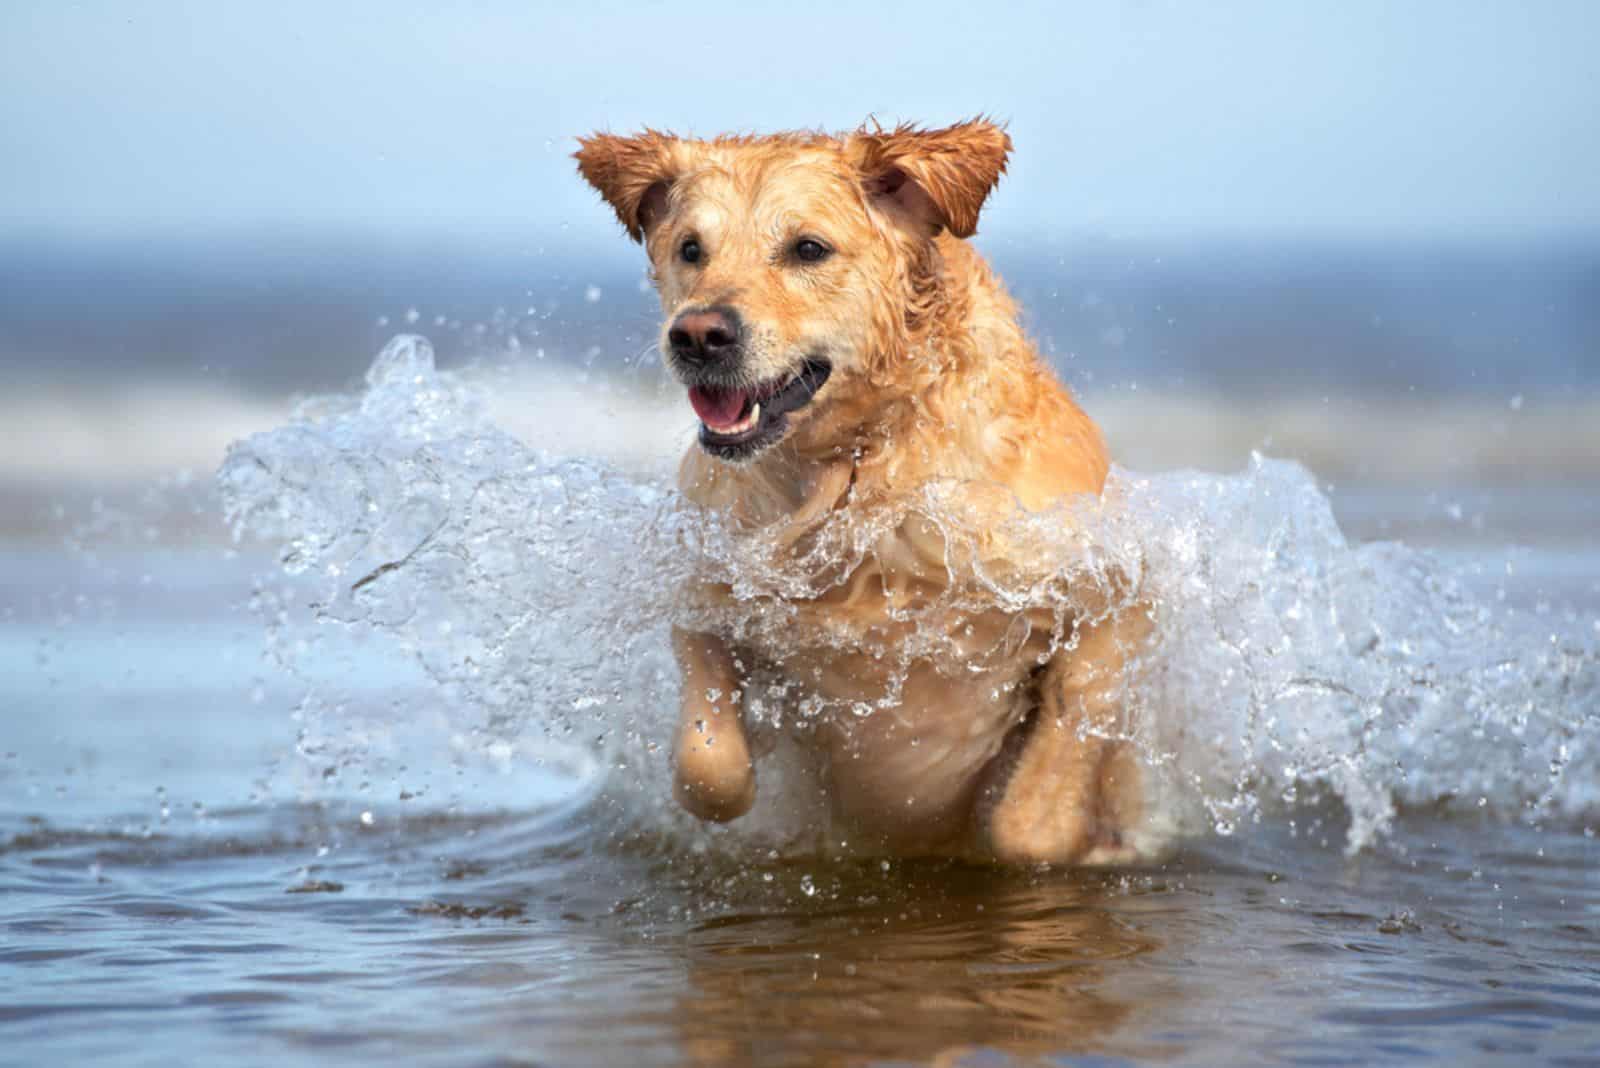 happy golden retriever dog jumping in water